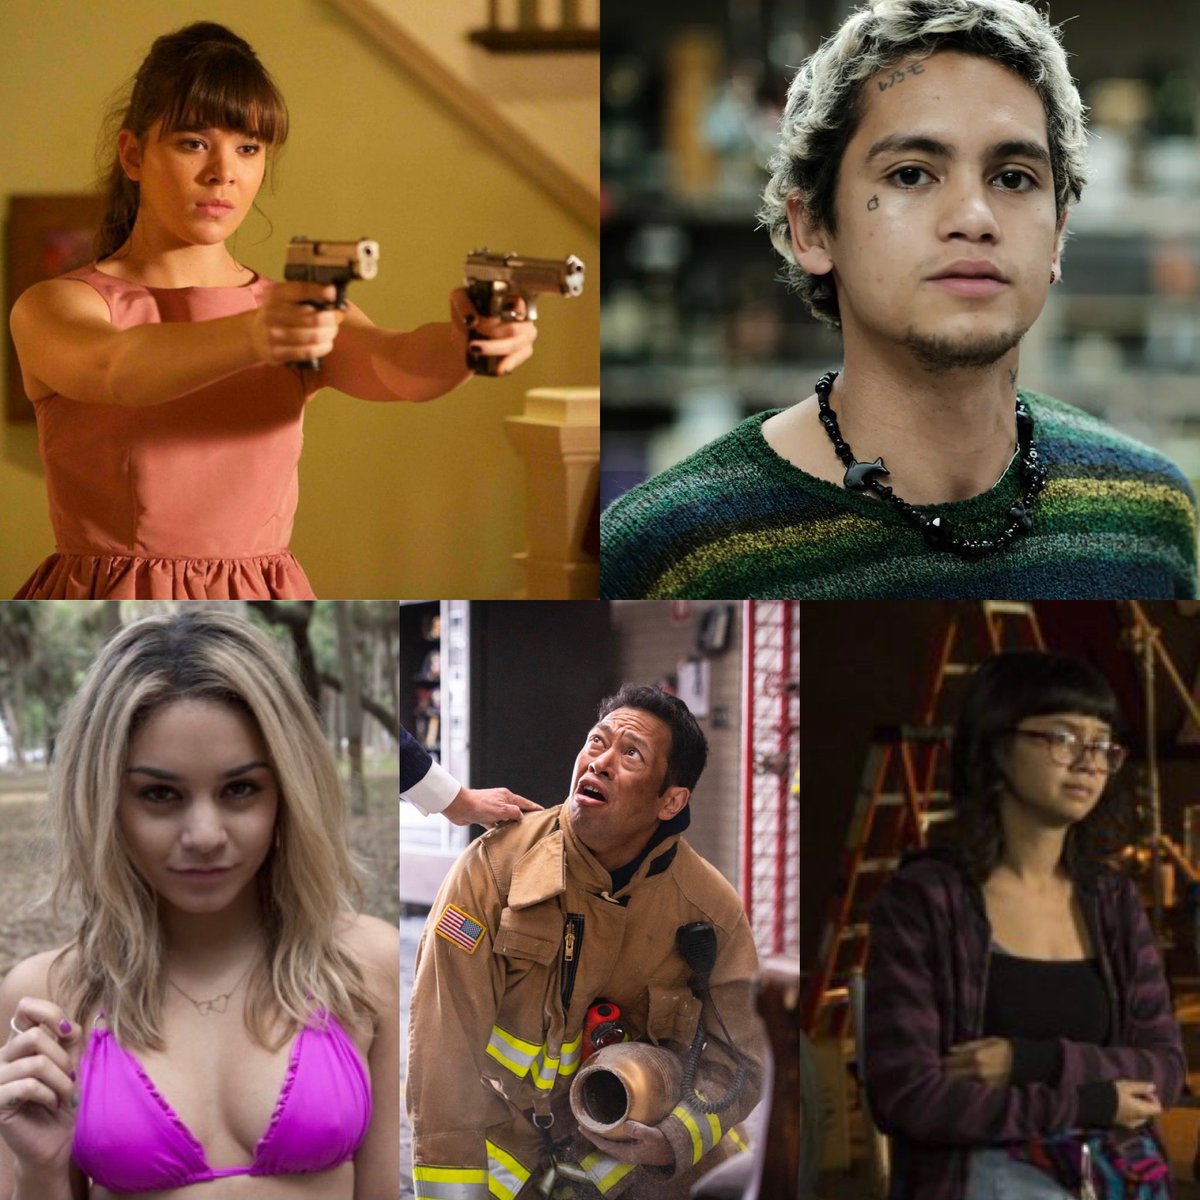 Only five actors of Filipino descent appeared in A24 movies and shows. #Filipino #A24 #movie #tvshows #charlyneyi #eugenecordero #Dominicfike #VanessaHudgens
#HaileeSteinfeld